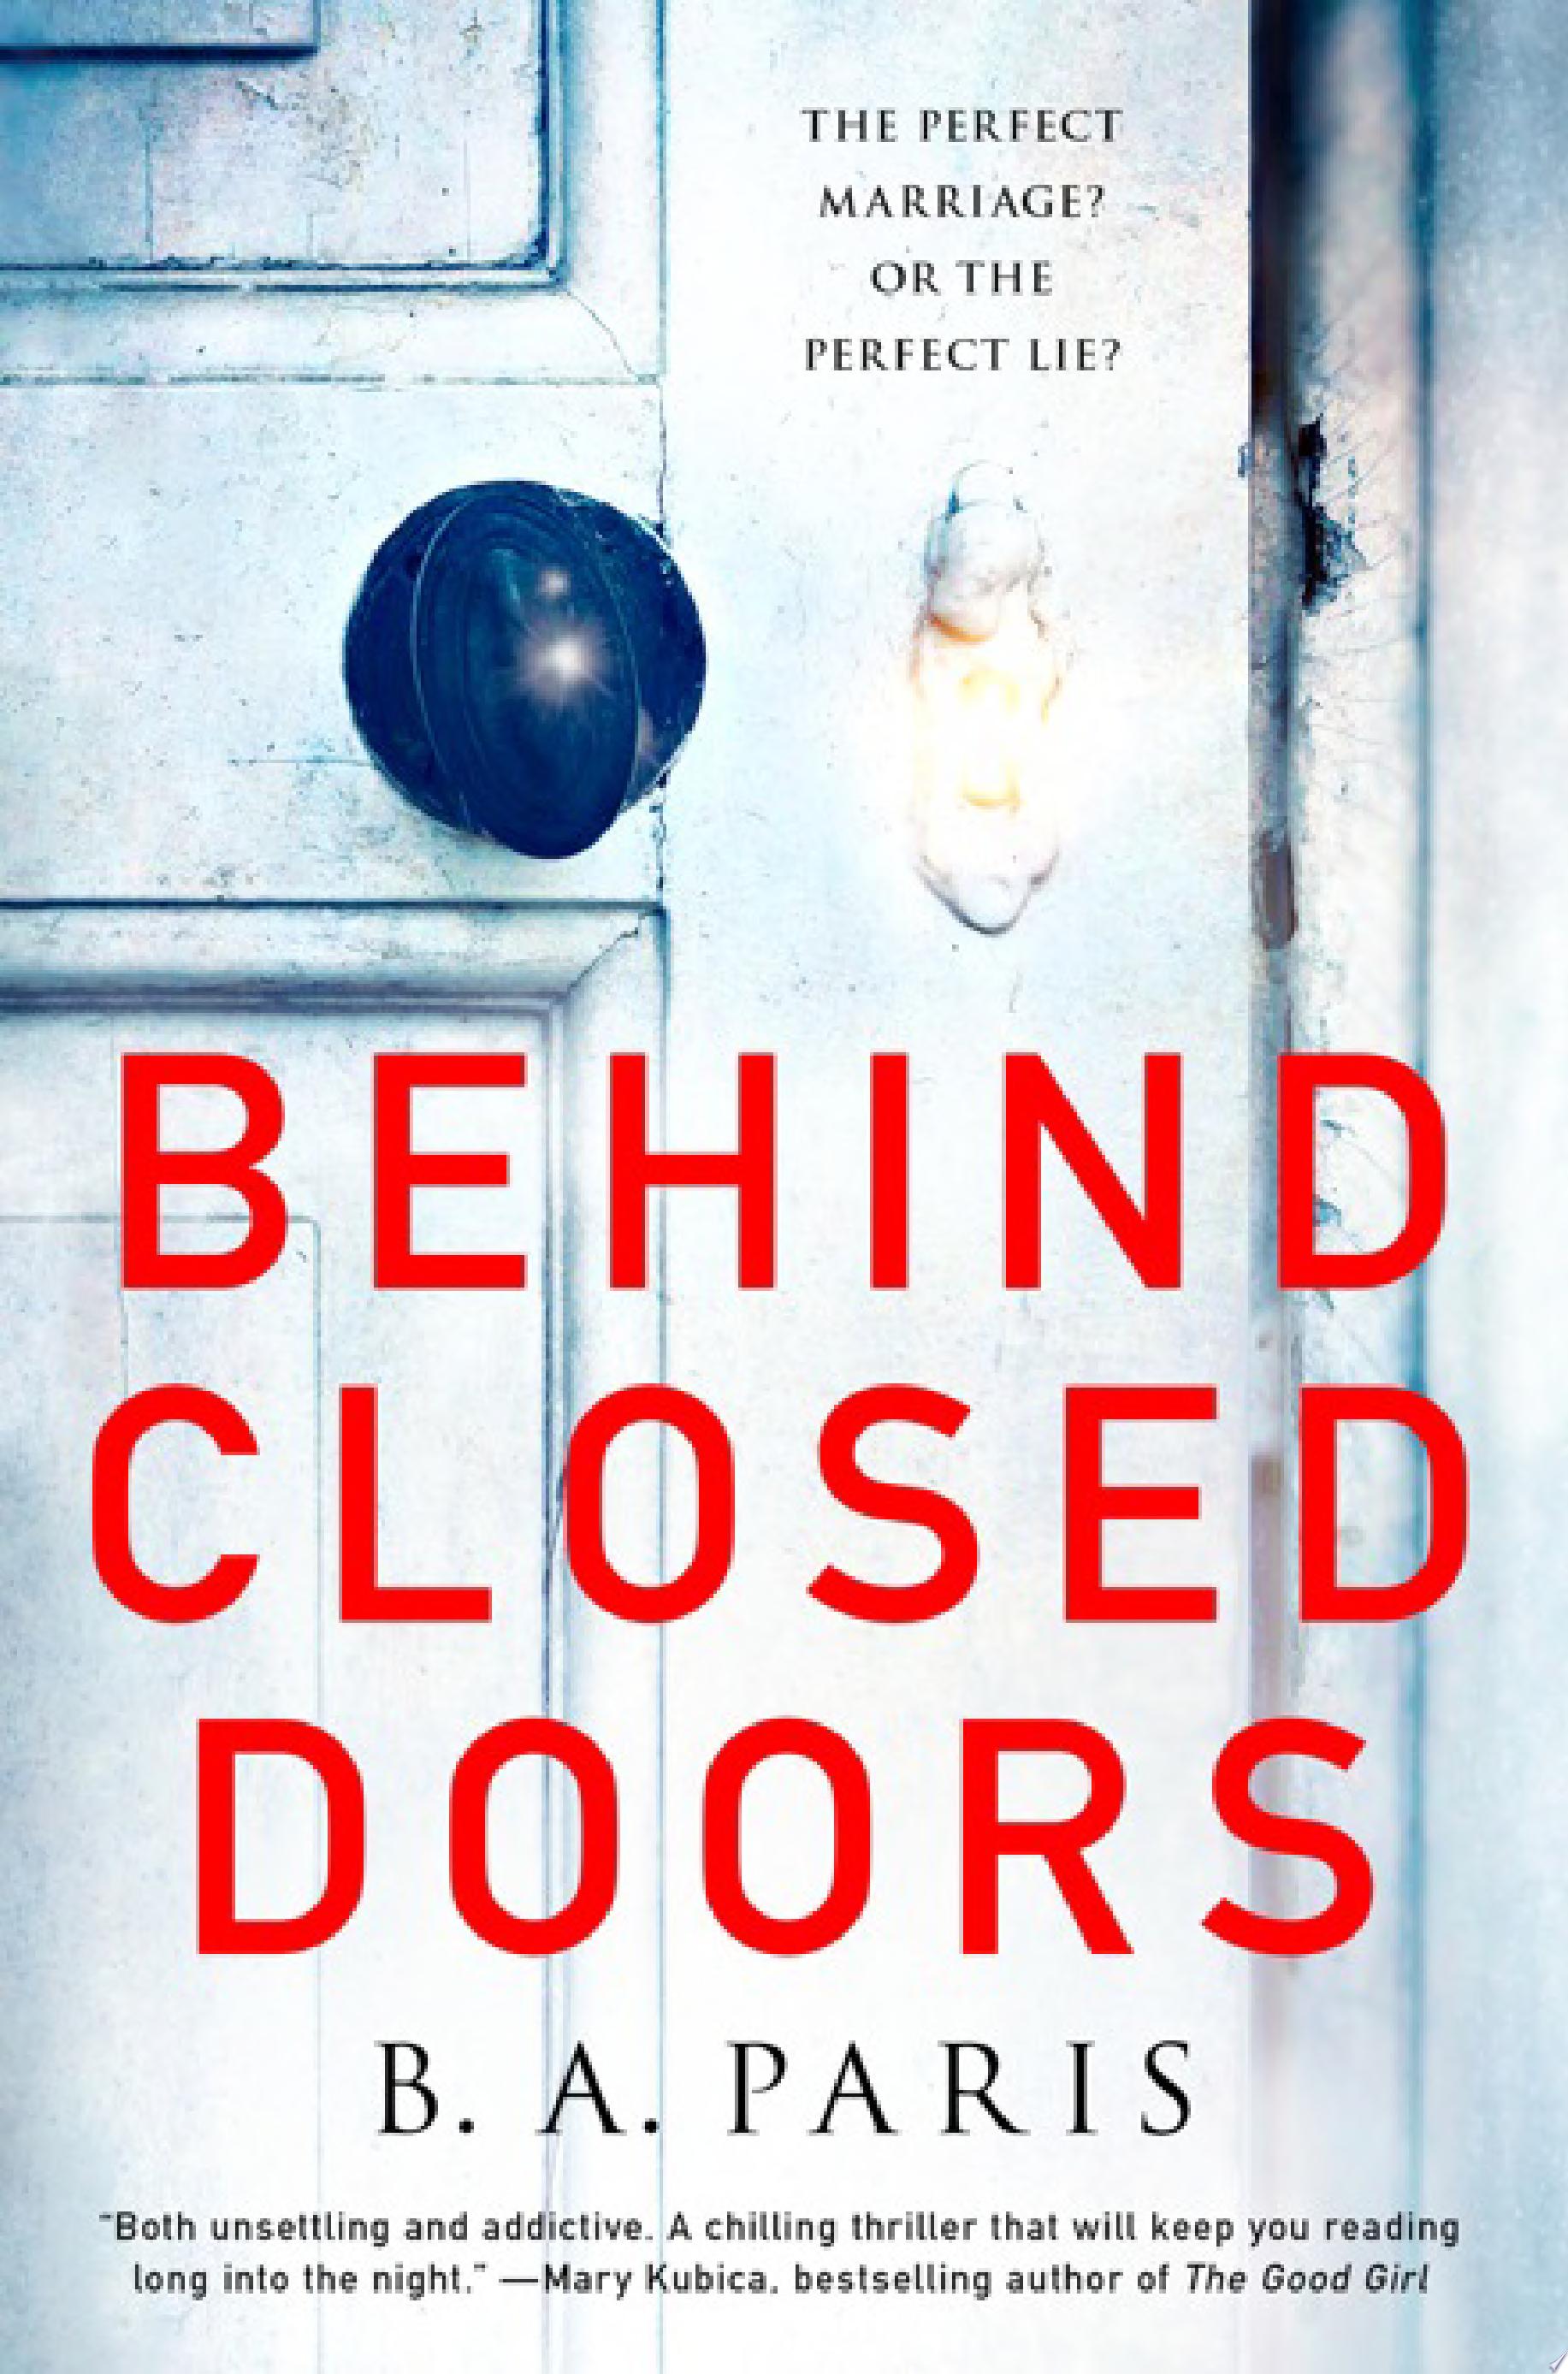 Image for "Behind Closed Doors"